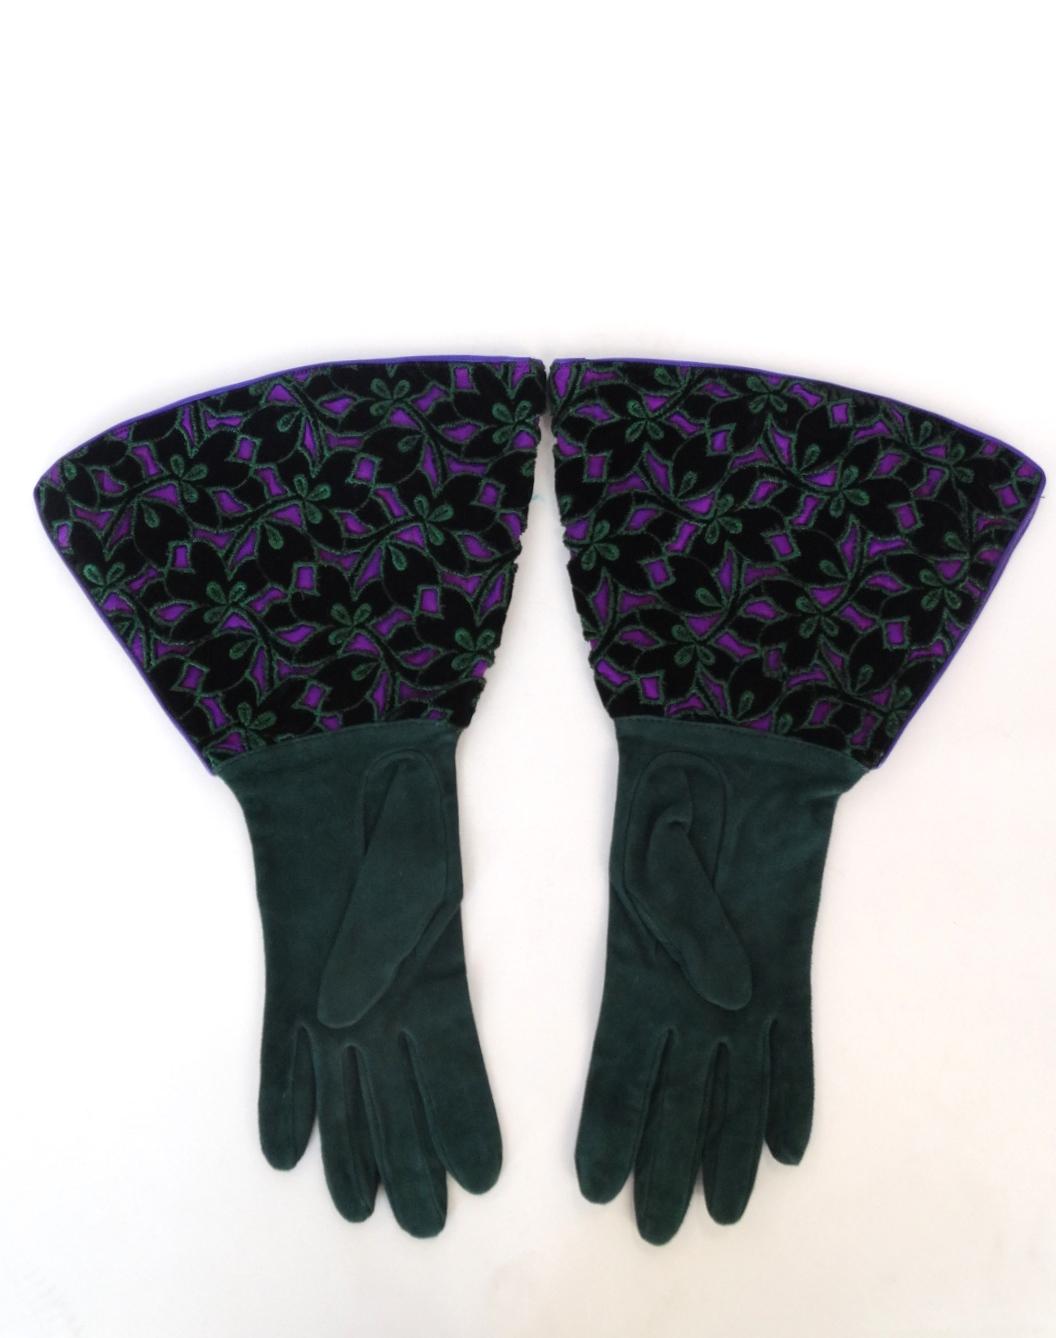 Women's 1980s Isabel Canovas Gauntlet Gloves with Cut Out Floral Motif For Sale